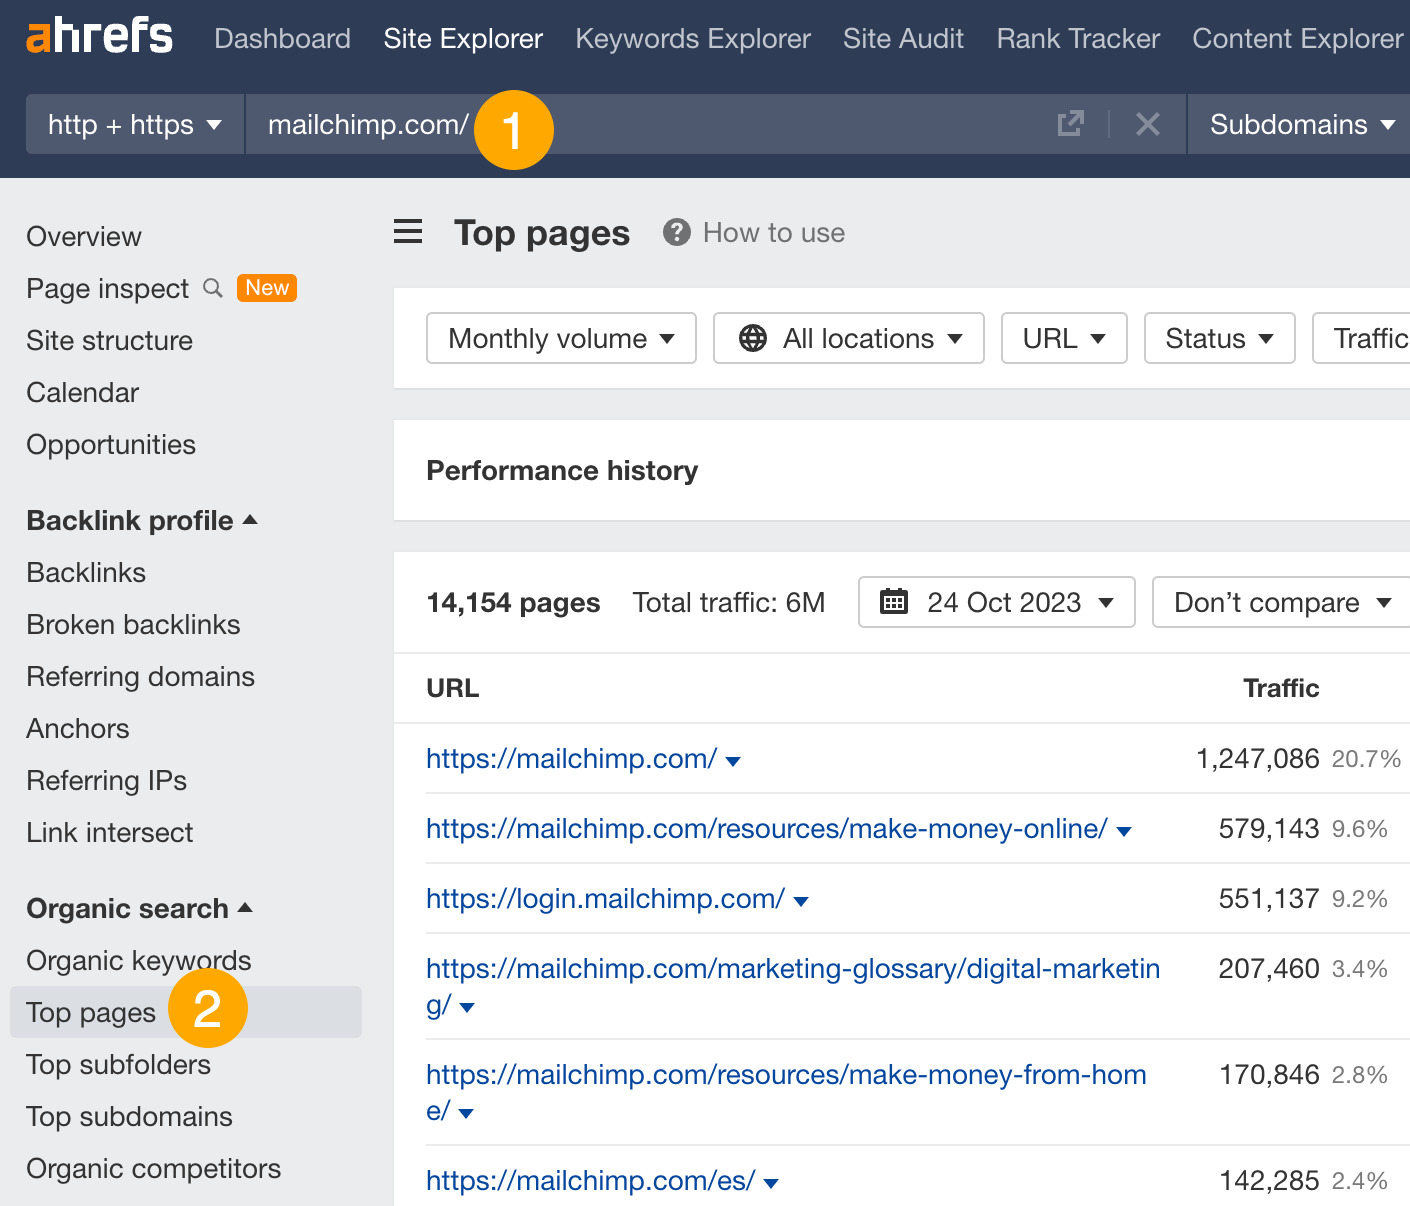 The pages that attract the most search traffic for Mailchimp